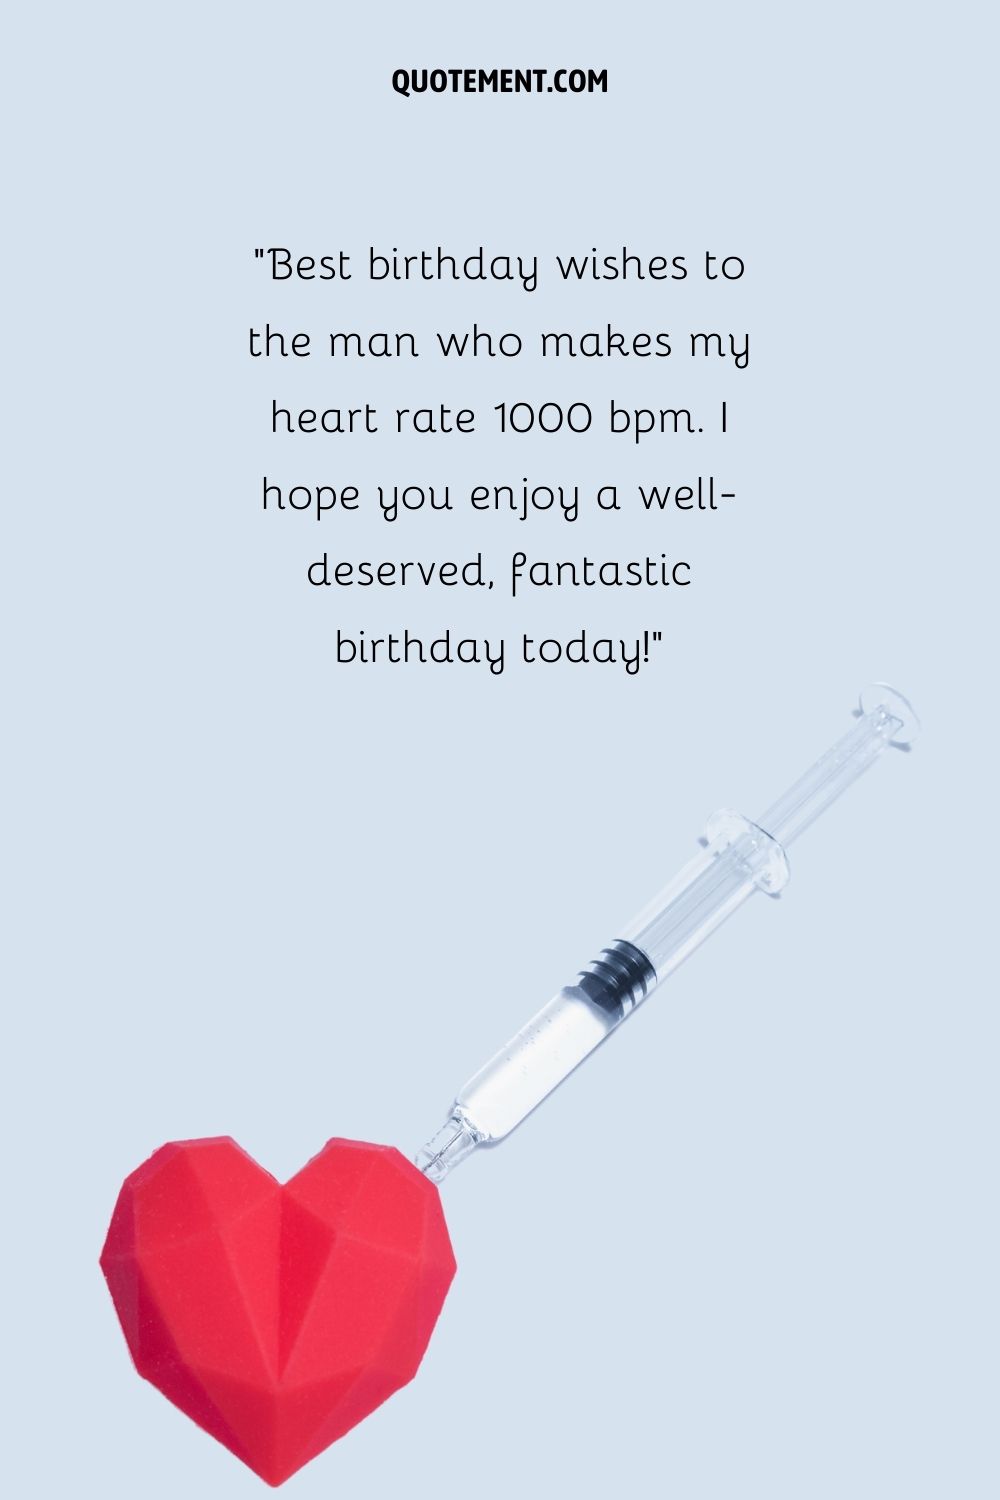 injection right to the heart representing birthday wishes for a doctor